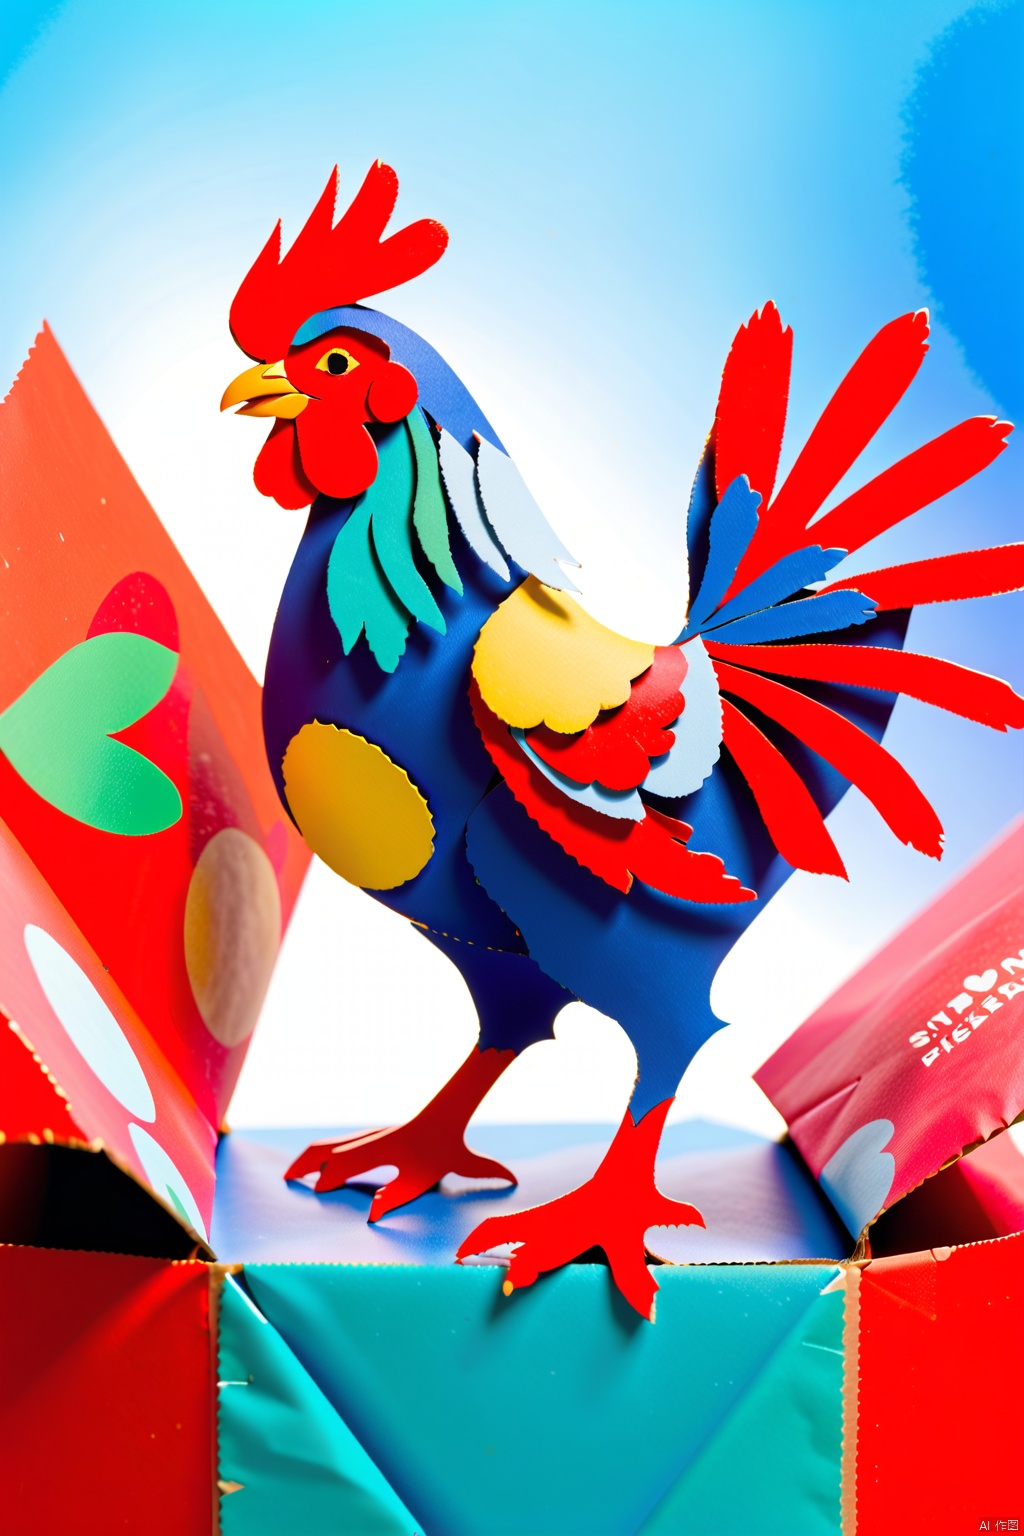 Food packaging, vibrant colors, innovative forms, high-grade materials, Primarily red and blue, with a cartoon chicken image,Transparent background, macro lens, bright lights, dynamic movement, and a joyful atmosphere, paper cut painting.